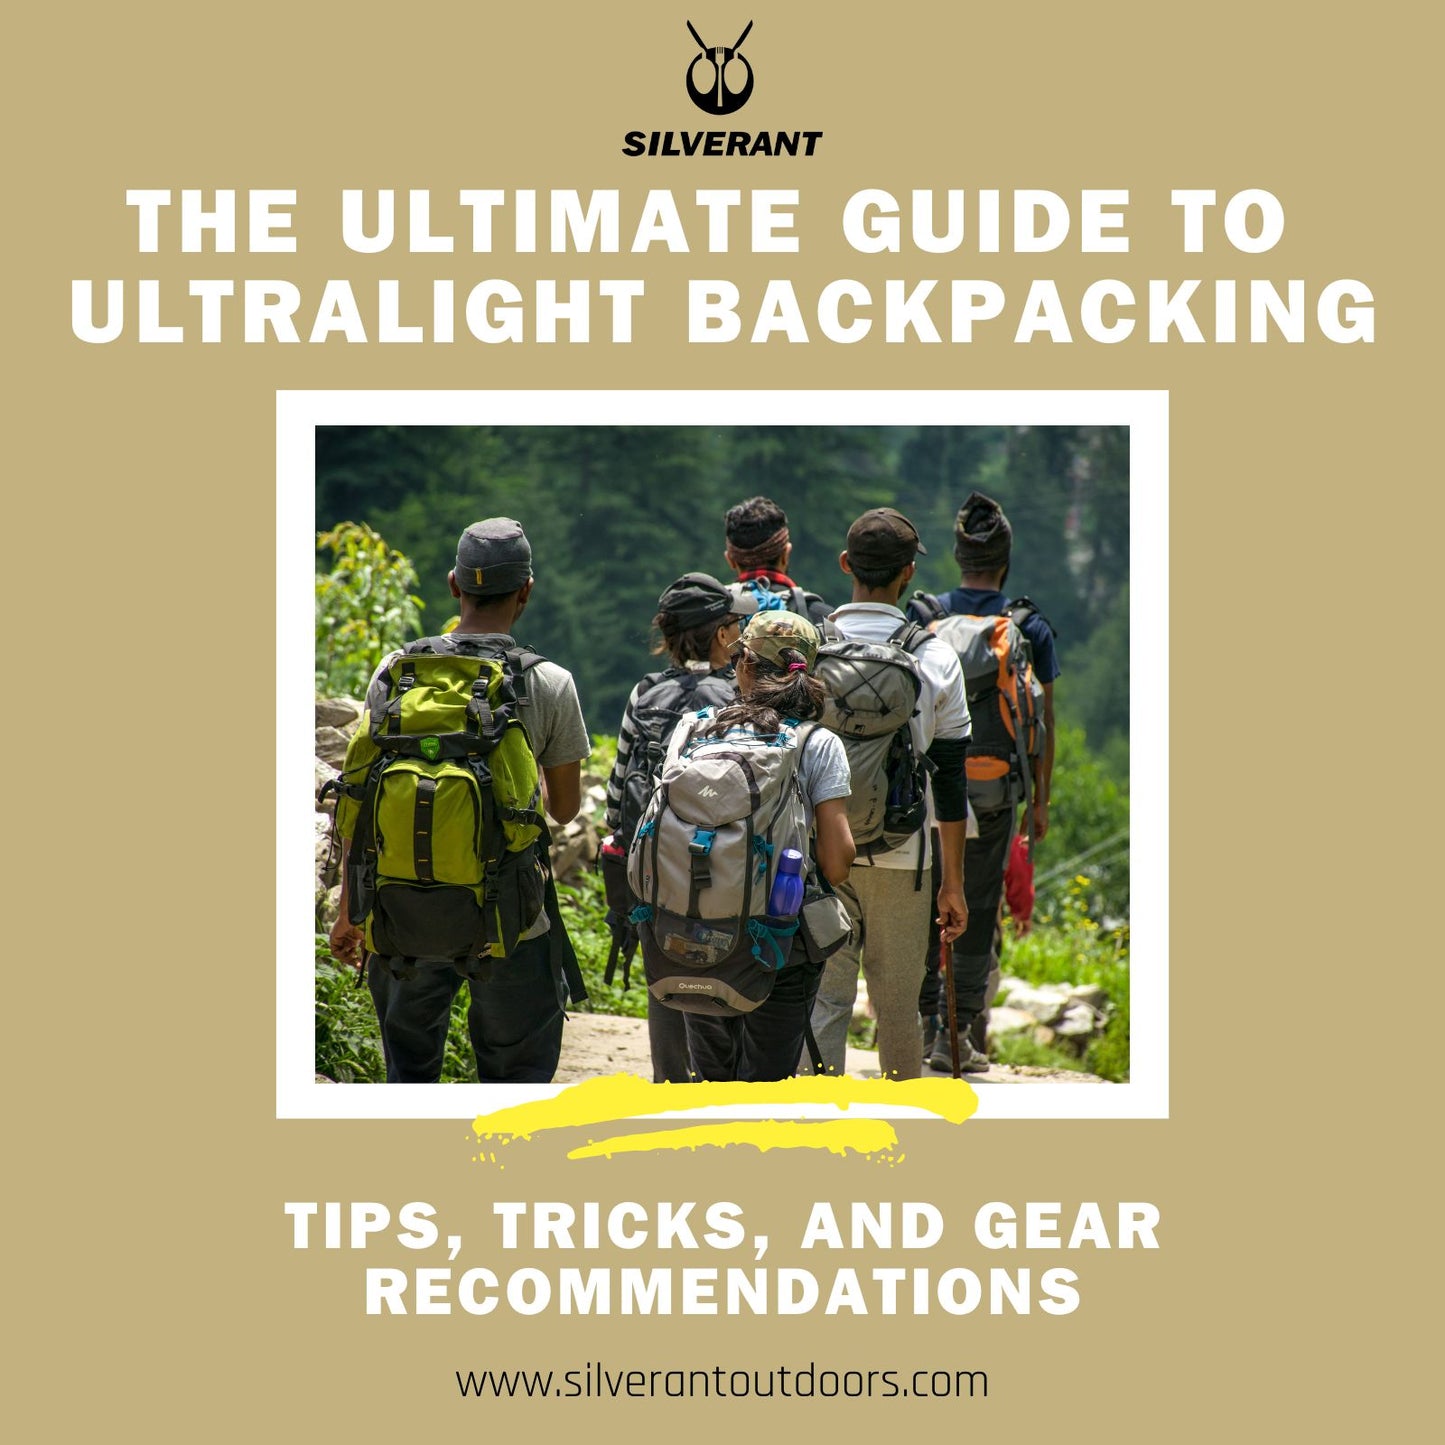 The Ultimate Guide to Ultralight Backpacking: Tips, Tricks, and Gear Recommendations